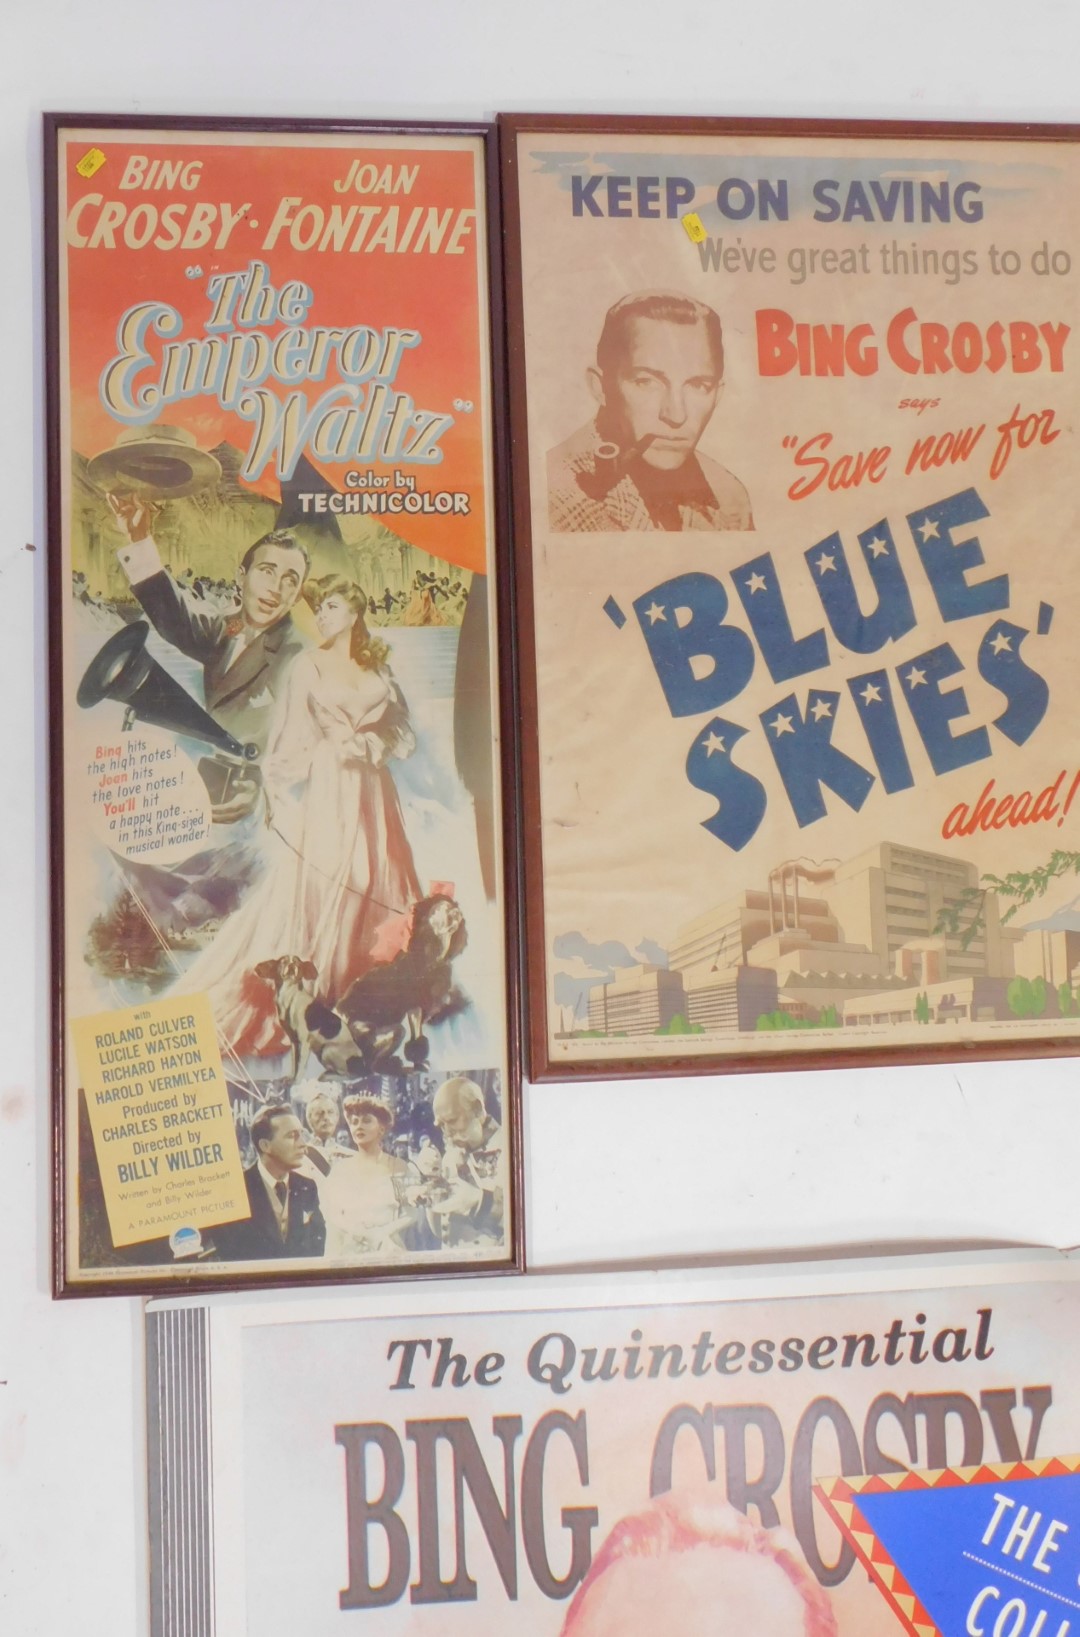 A collection of Bing Crosby posters, to include advertising 'Keep on Saving We've Great Things to do - Image 4 of 6